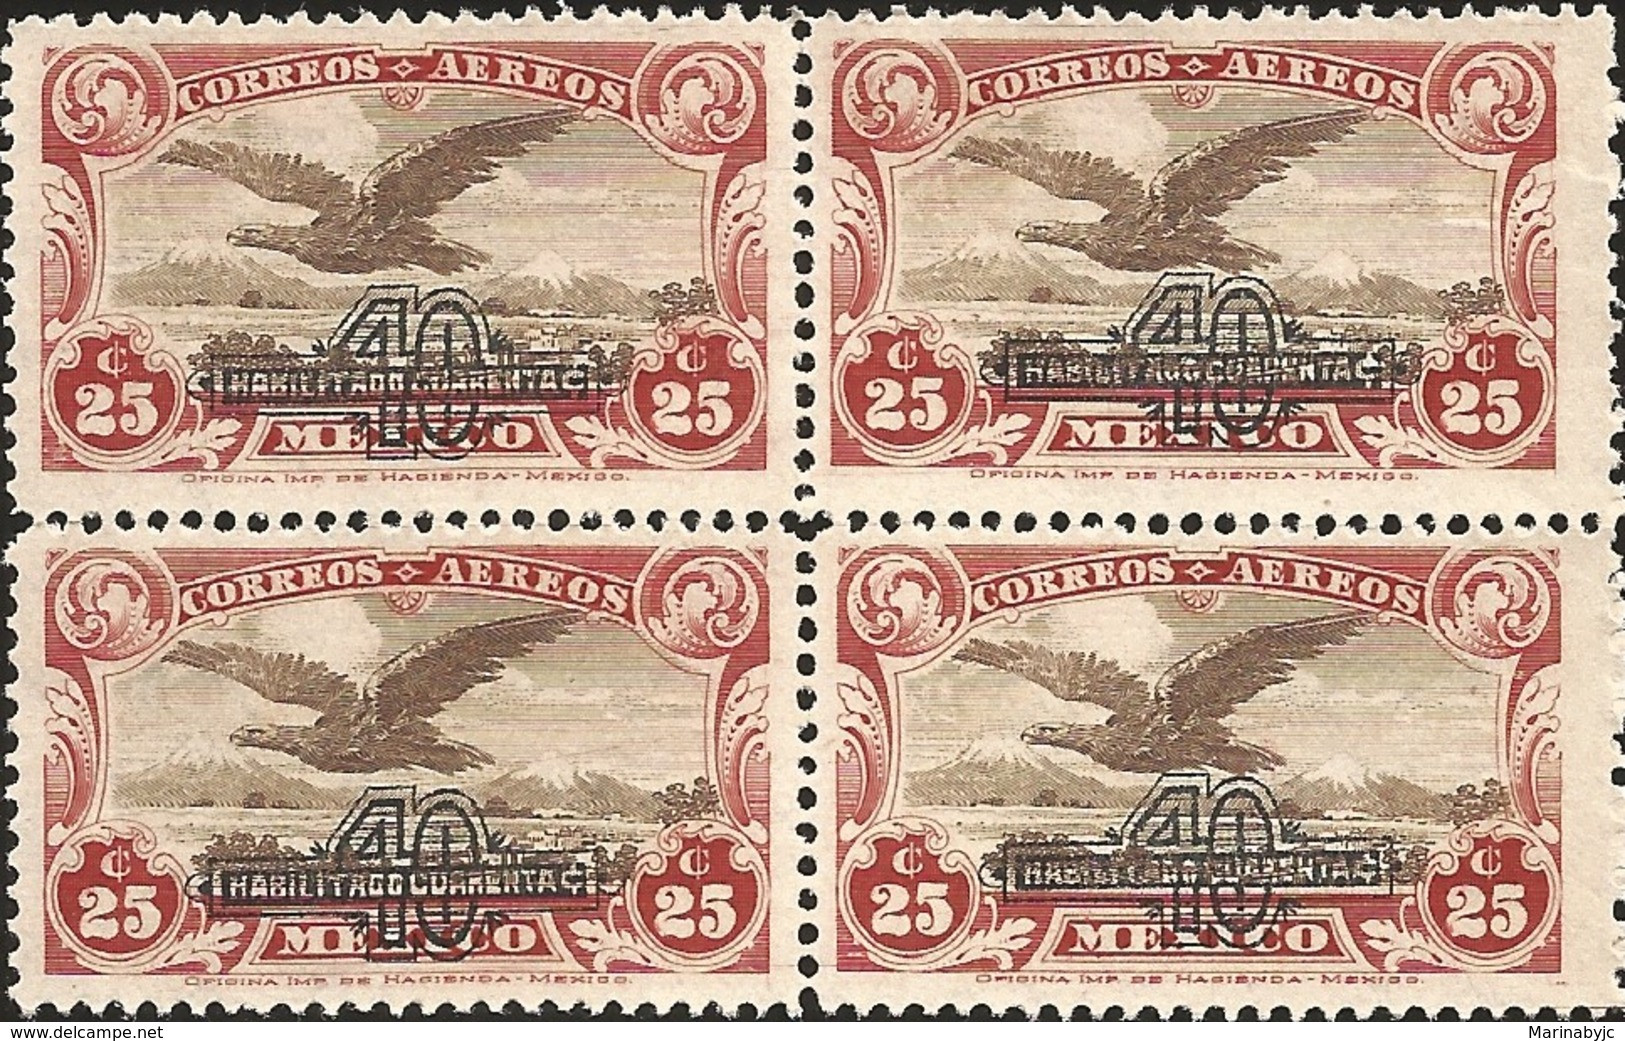 RJ) 1928 MEXICO, BLOCK OF 4, EAGLE OVER MOUNTAINS, WITH OVERPRINT IN BLACK SCOTT C47, MNH - México